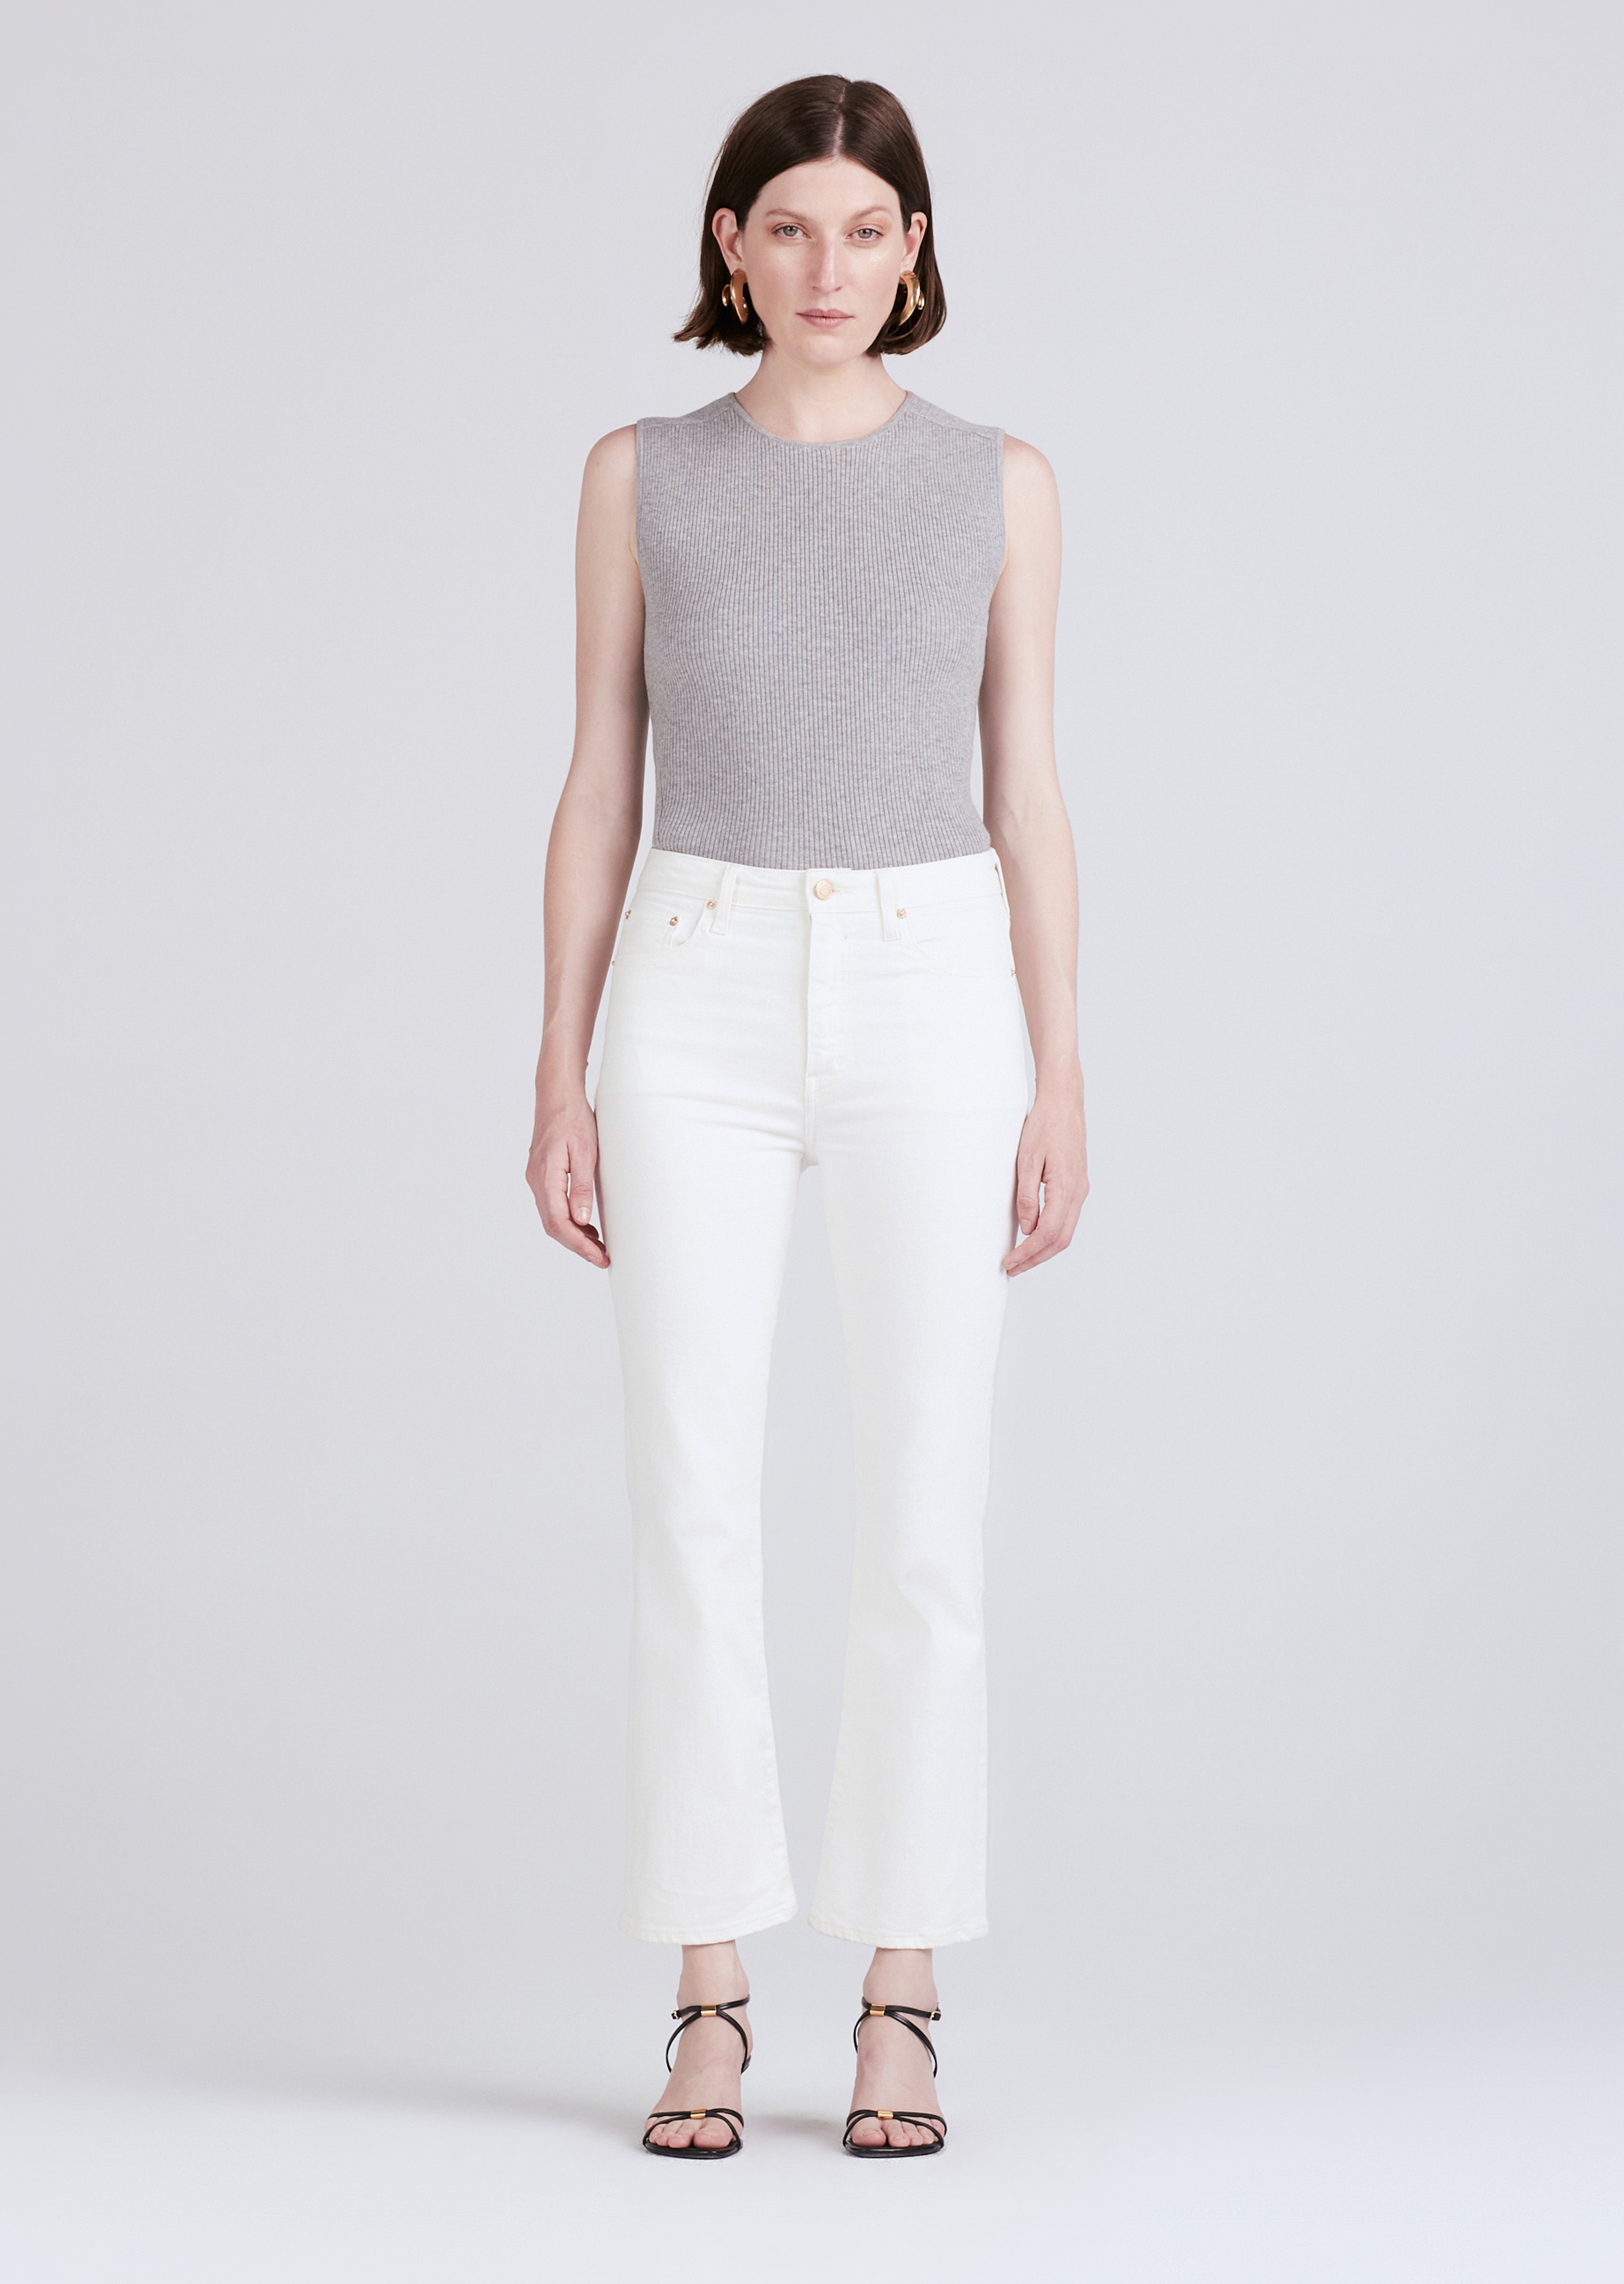 Lynda X High Waist Cropped Flare Cropped Flare Jeans Trousers, Jeans